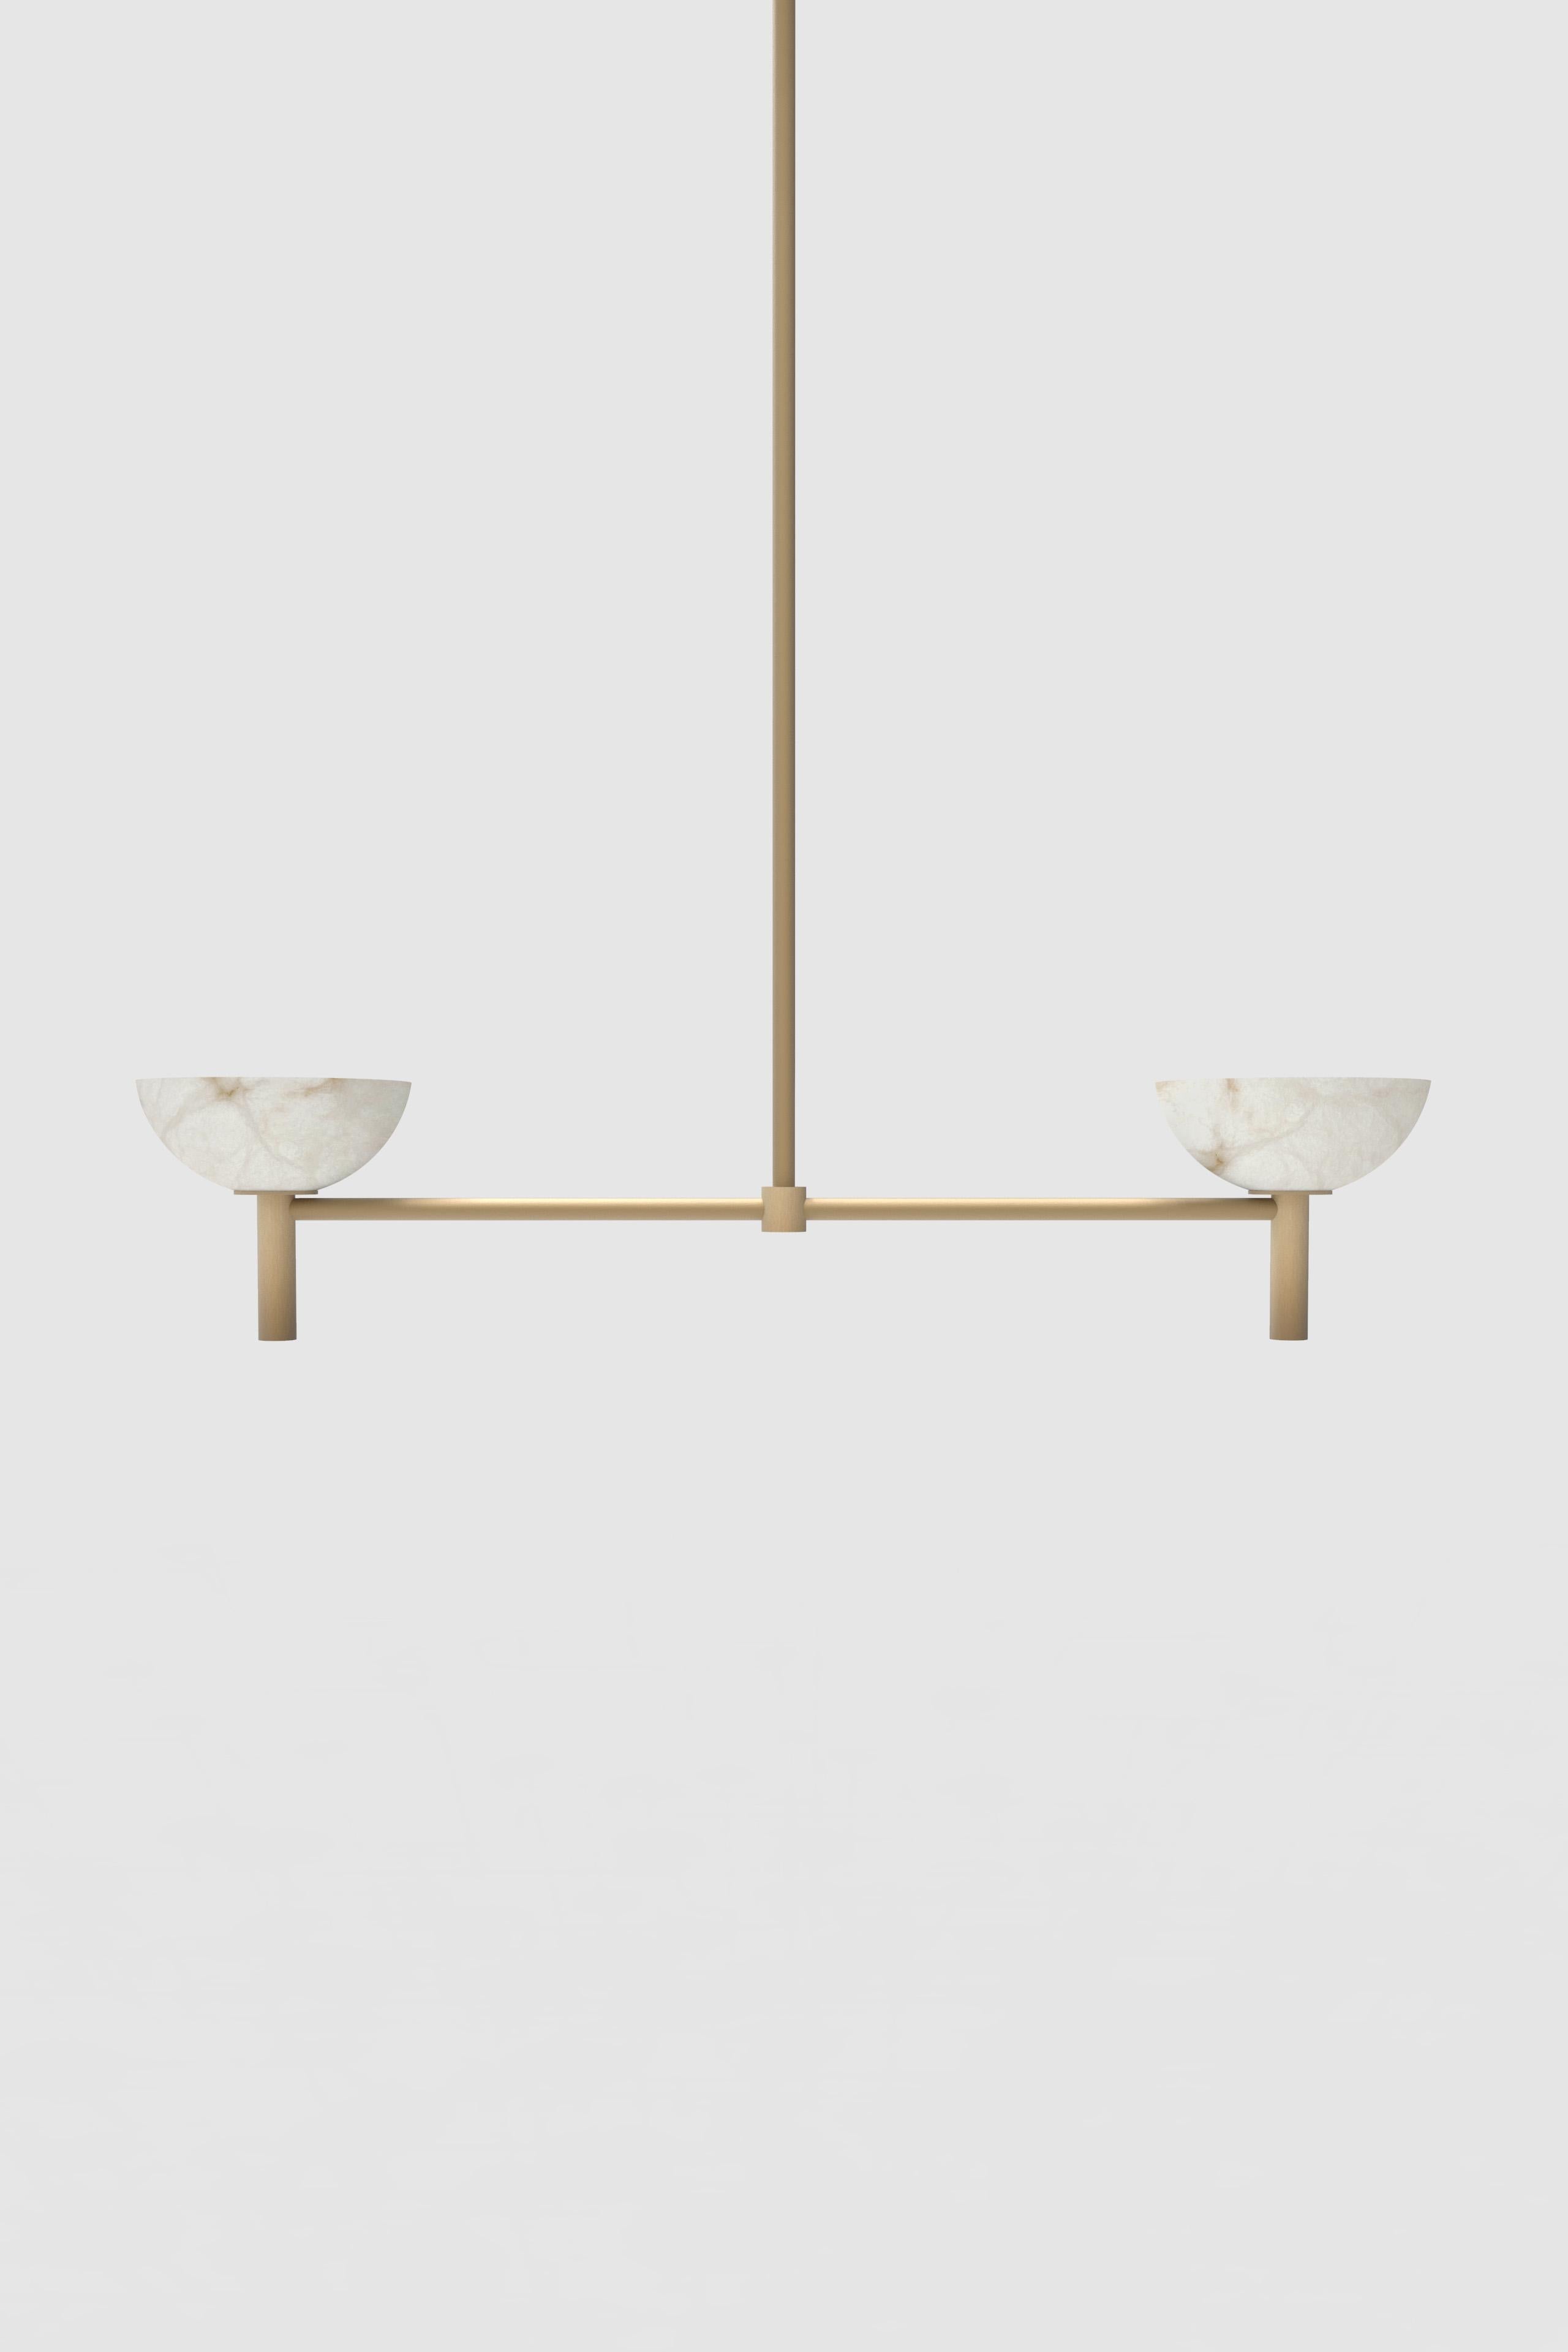 Orphan Work 200A Pendant BB
Shown in alabaster with brushed brass
Available in brushed brass and blackened brass
Measures: 42